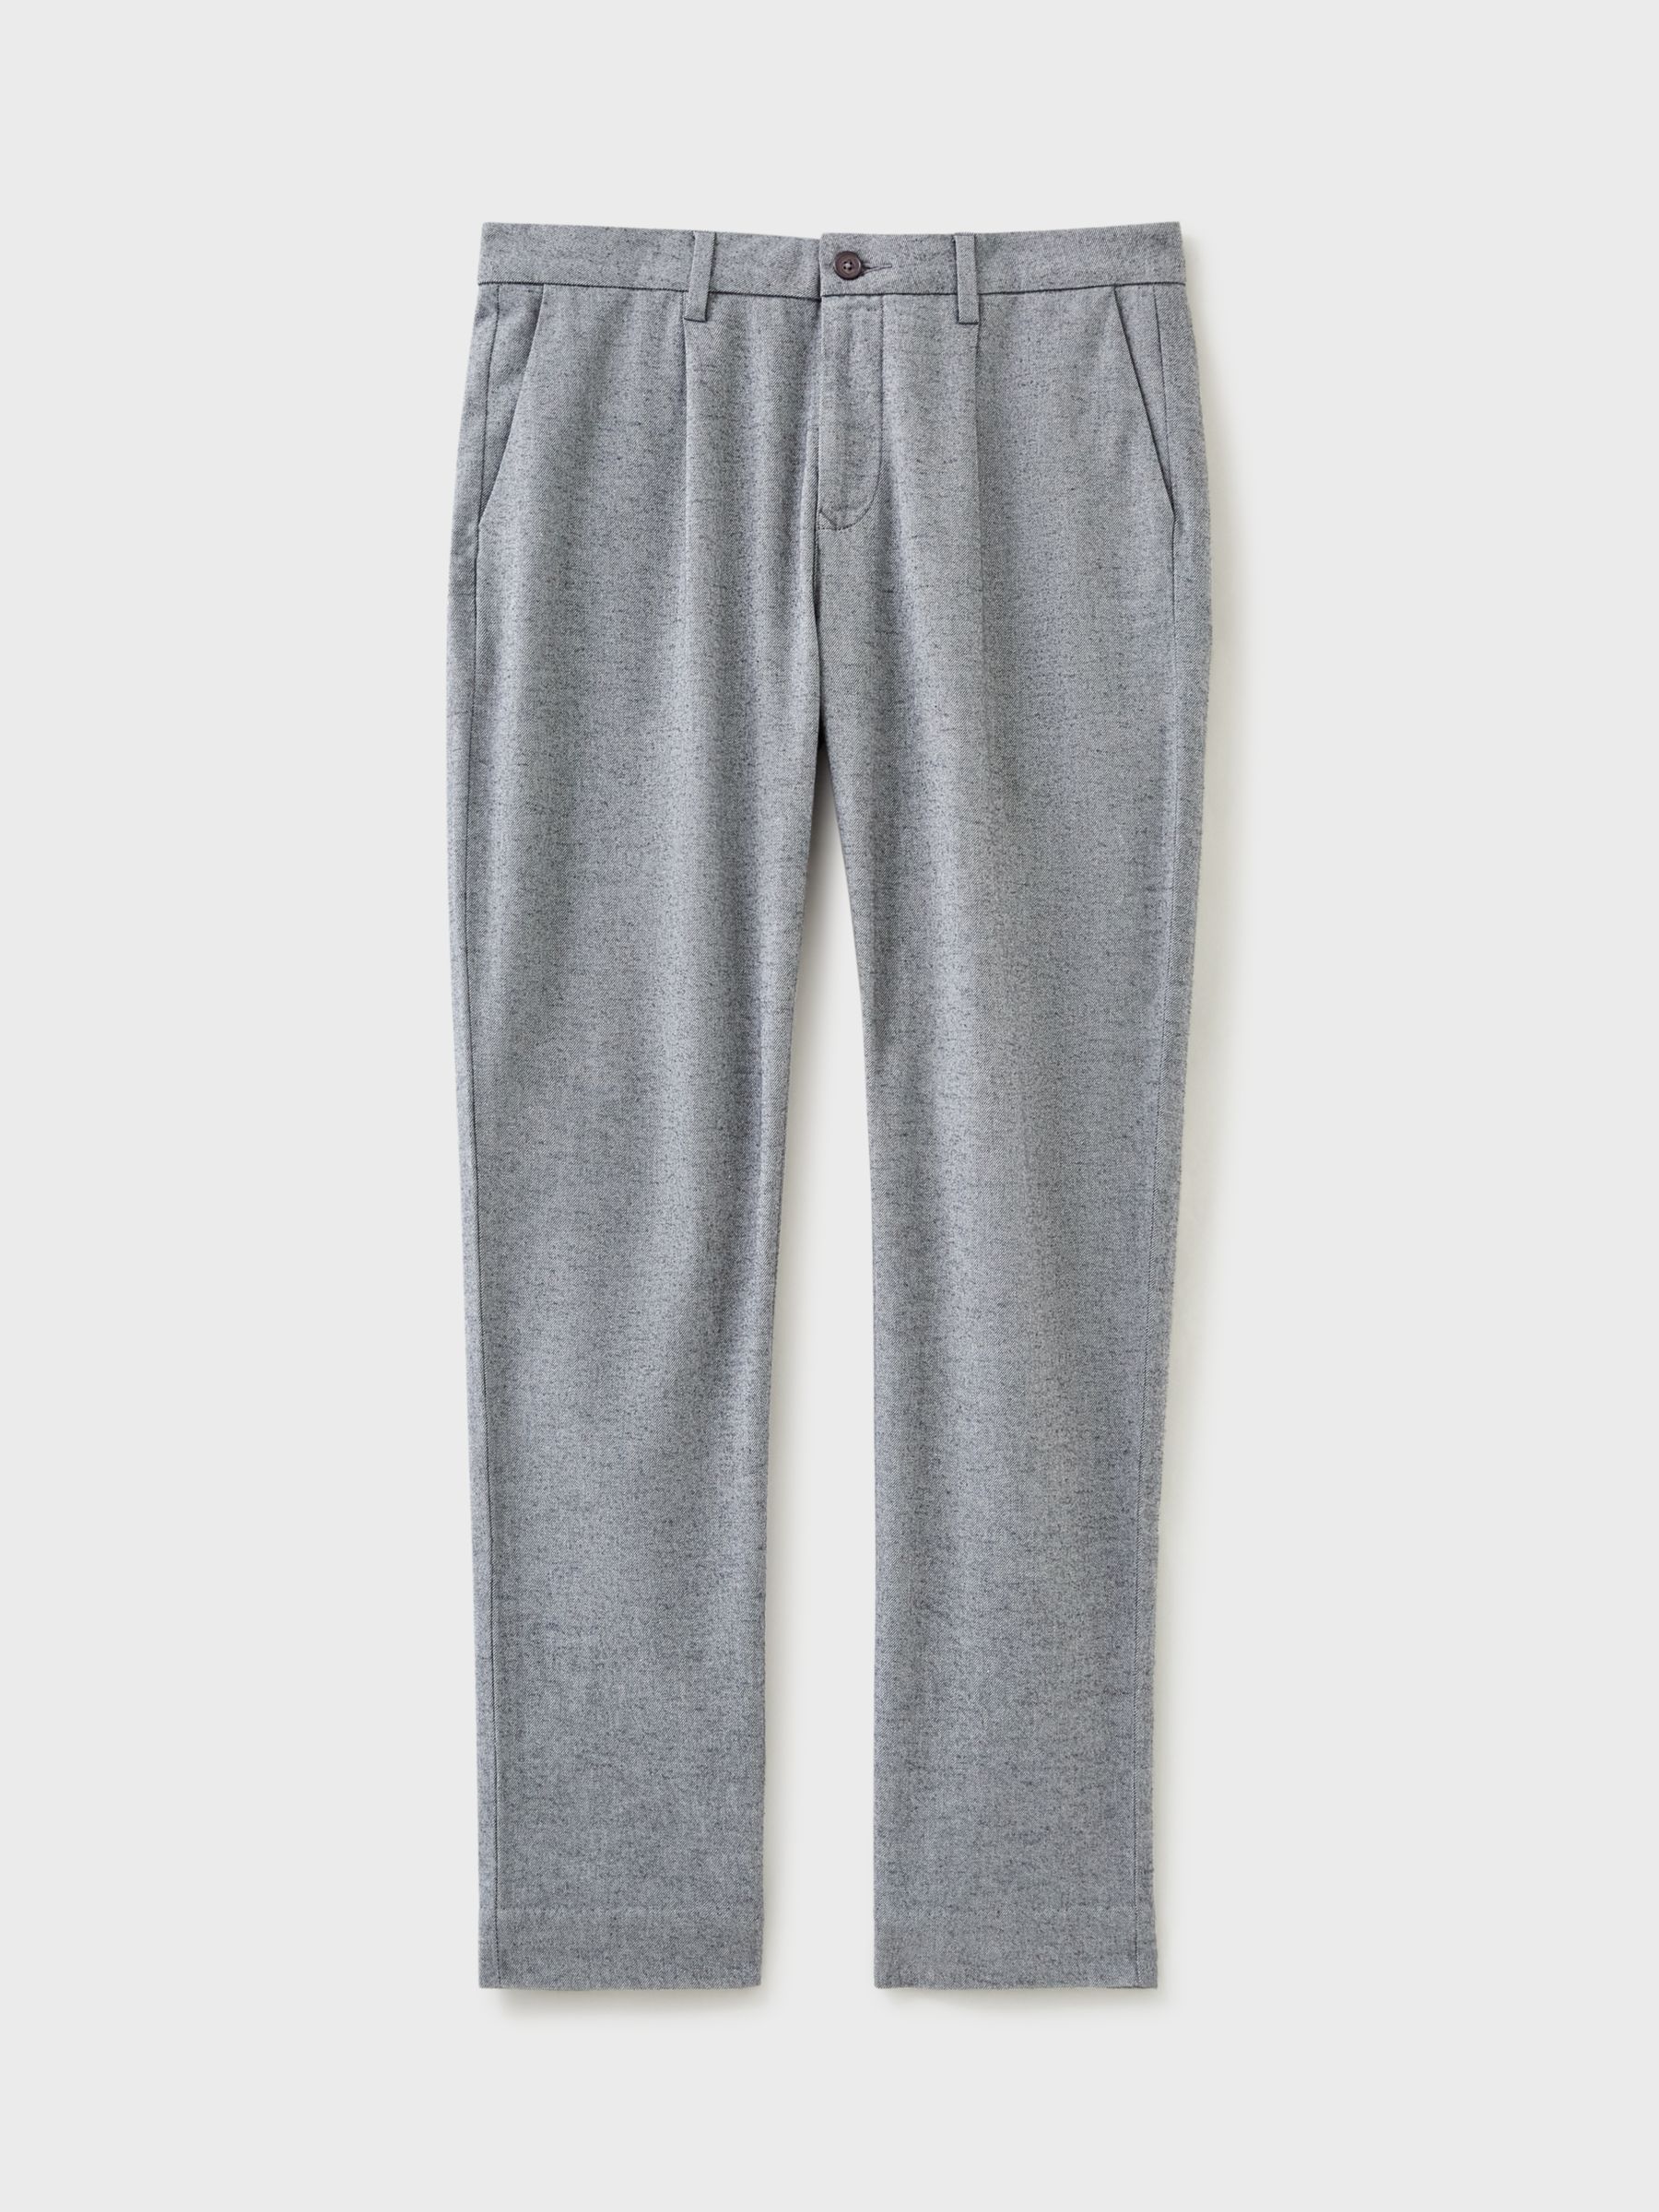 Crew Clothing Straight Fit Chinos, Graphite Grey, 30S